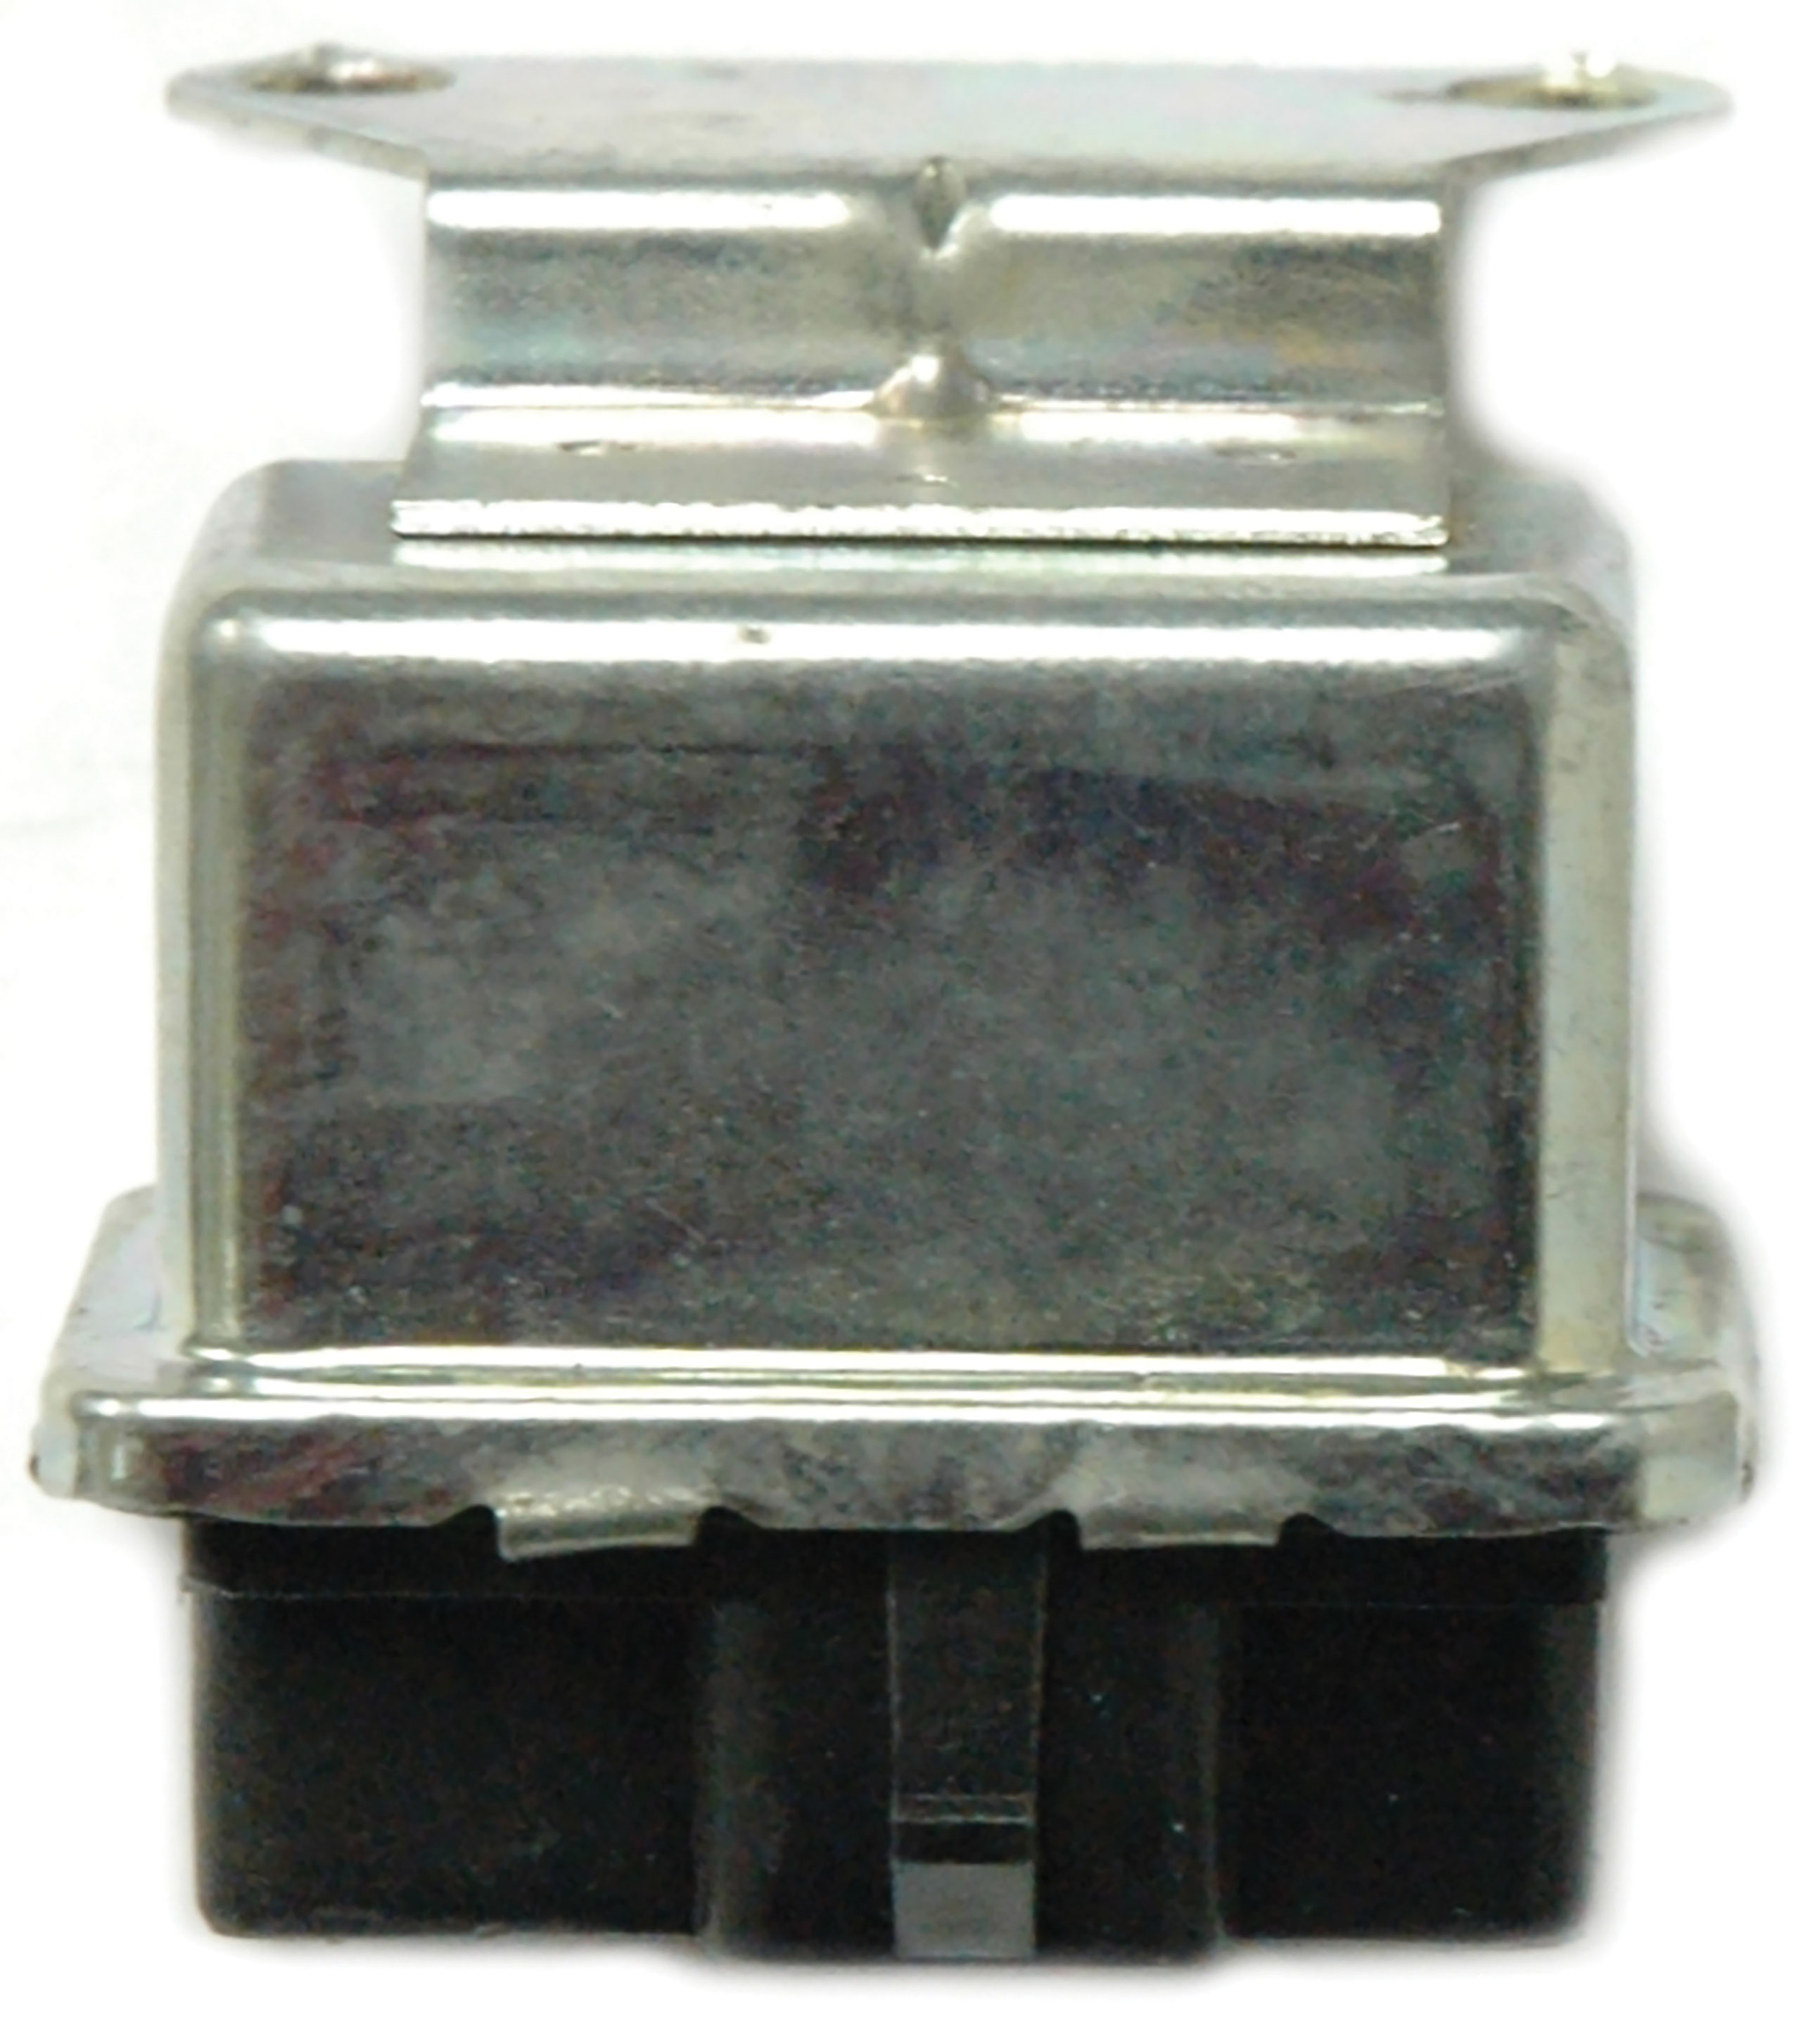 C3 1978-1982 Chevrolet Corvette Windshield Wiper Relay - Lectric Limited, Inc.